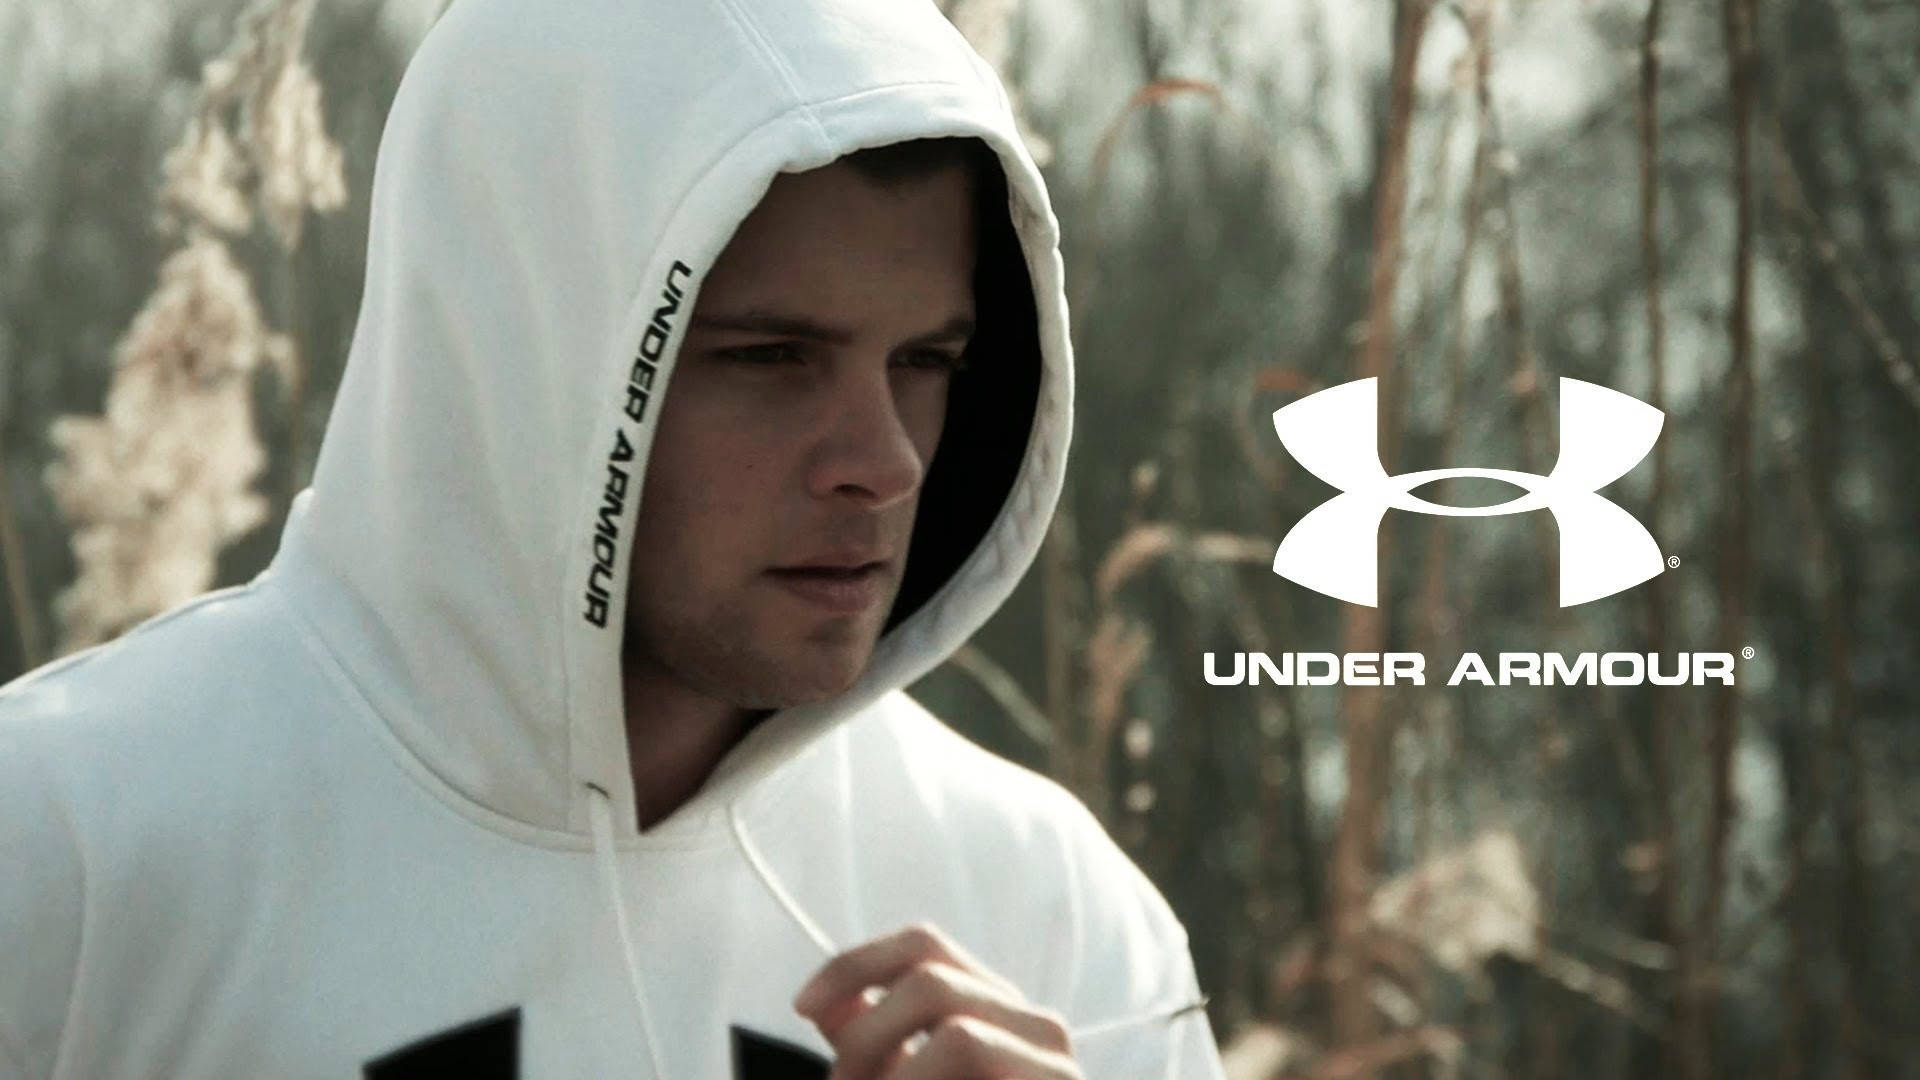 Under Armour Promotional Poster Wallpaper